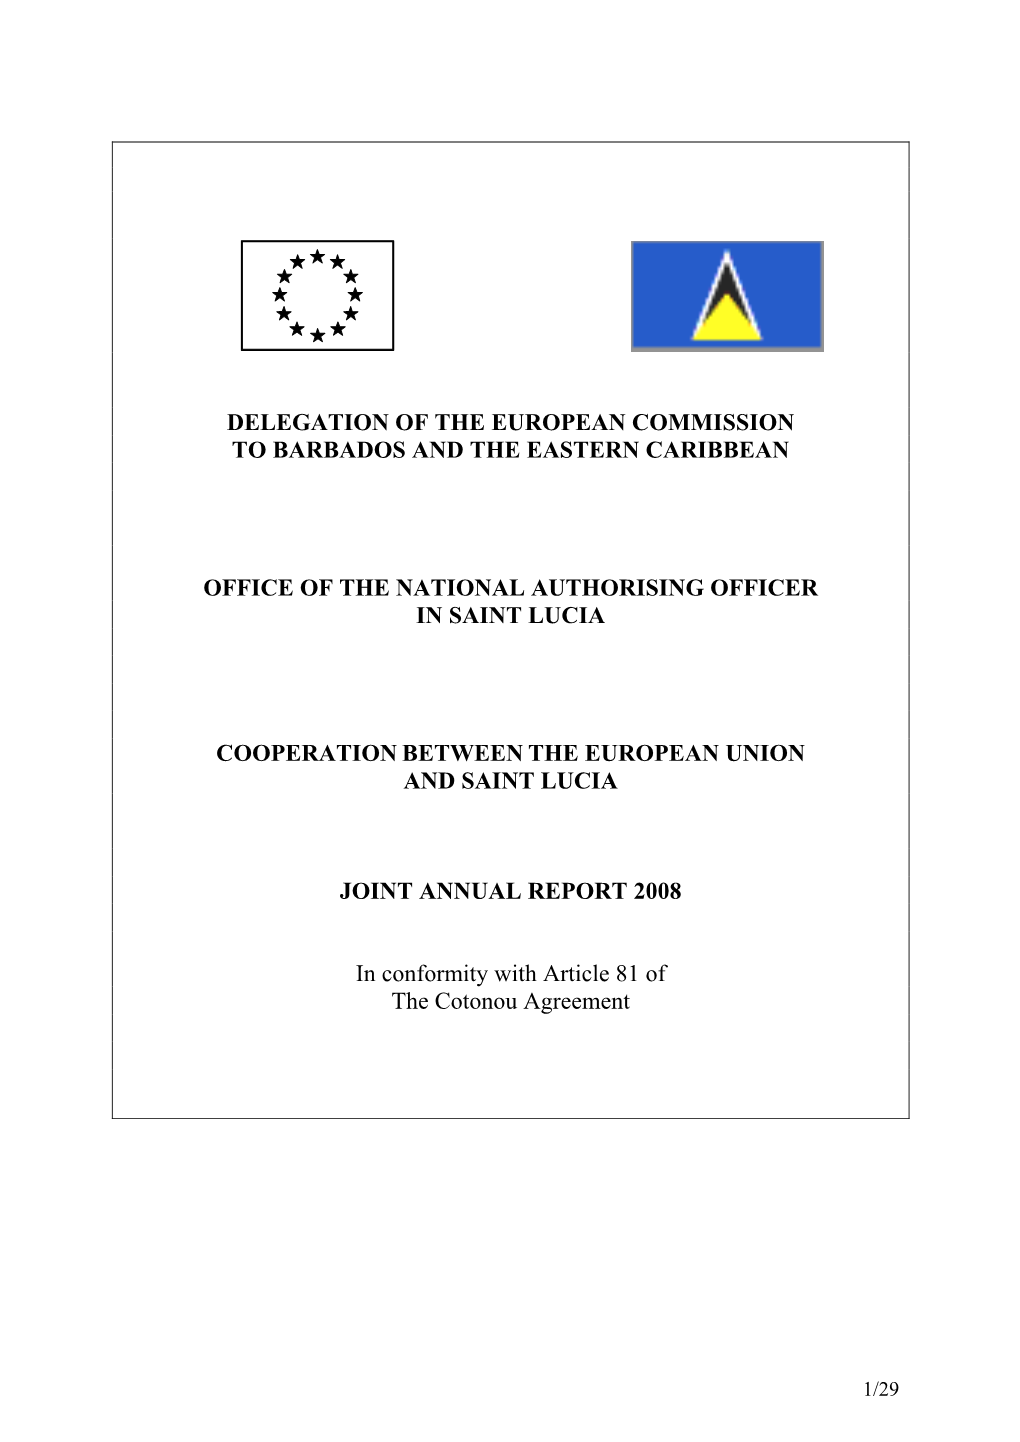 Delegation of the European Commission to Barbados and the Eastern Caribbean